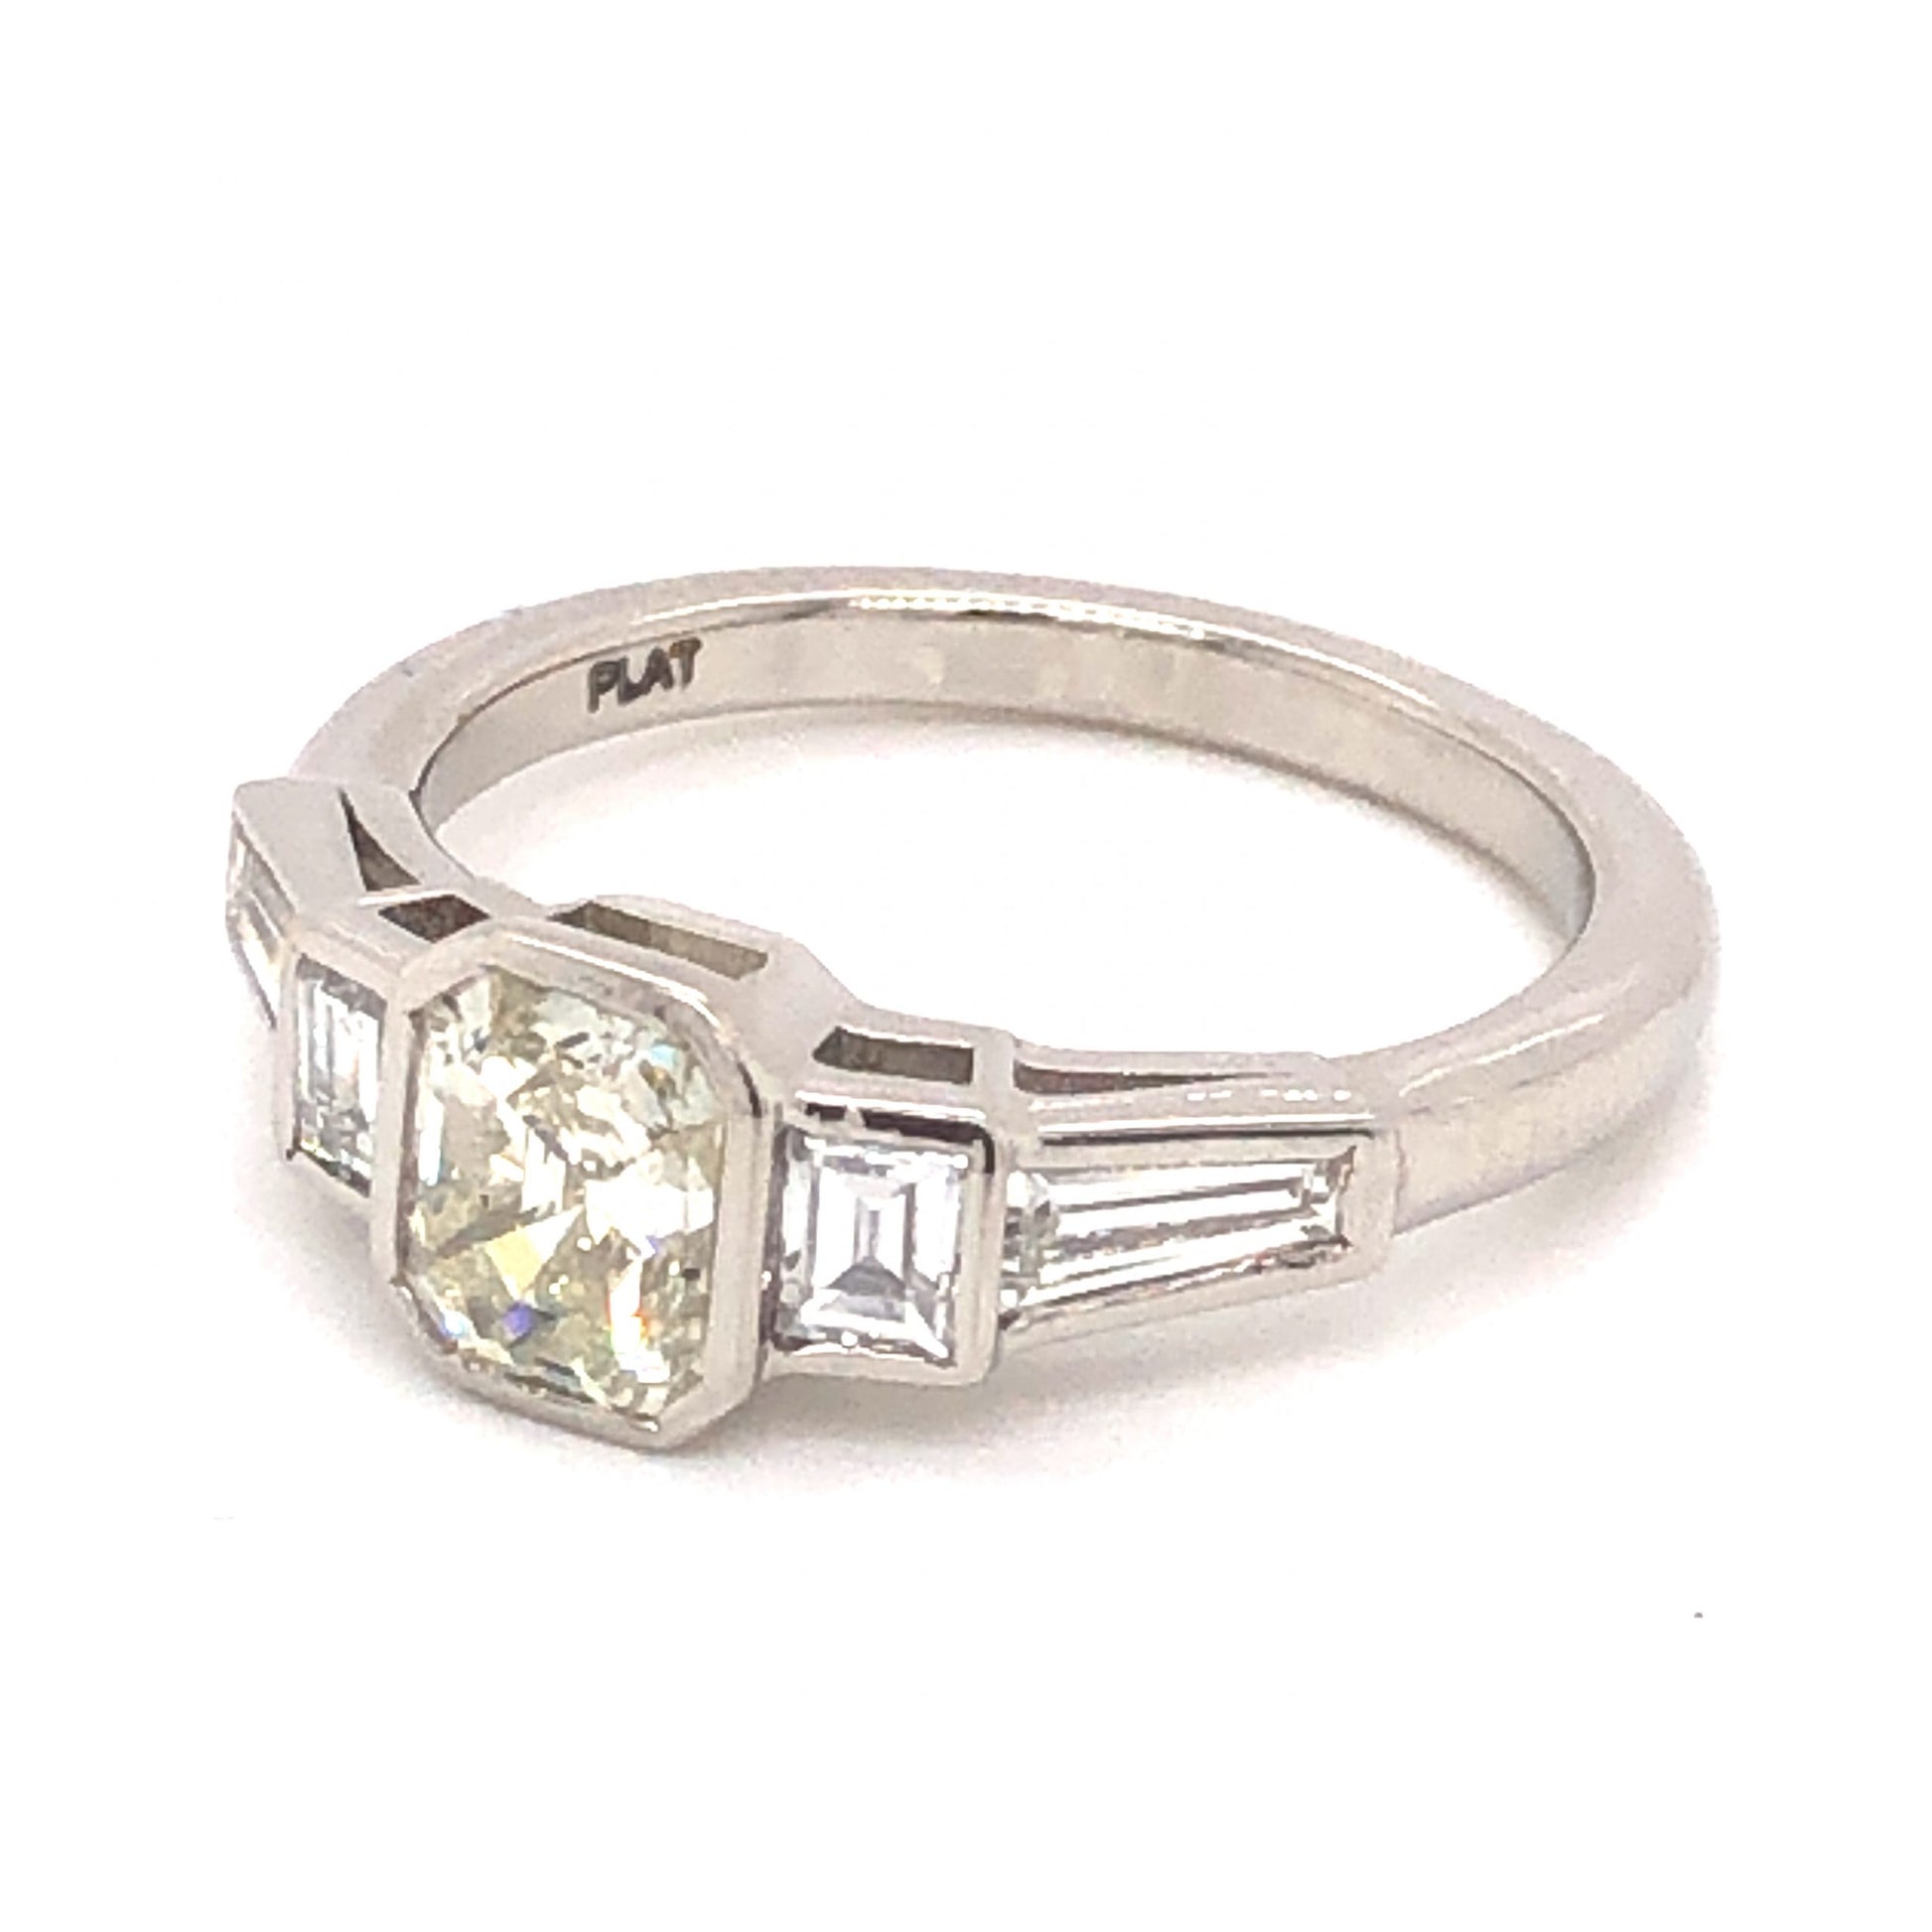 1.10 Art Deco Diamond Engagement Ring in PlatinumComposition: Platinum Ring Size: 6 Total Diamond Weight: 1.80ct Total Gram Weight: 5.4 g Inscription: PLAT
      